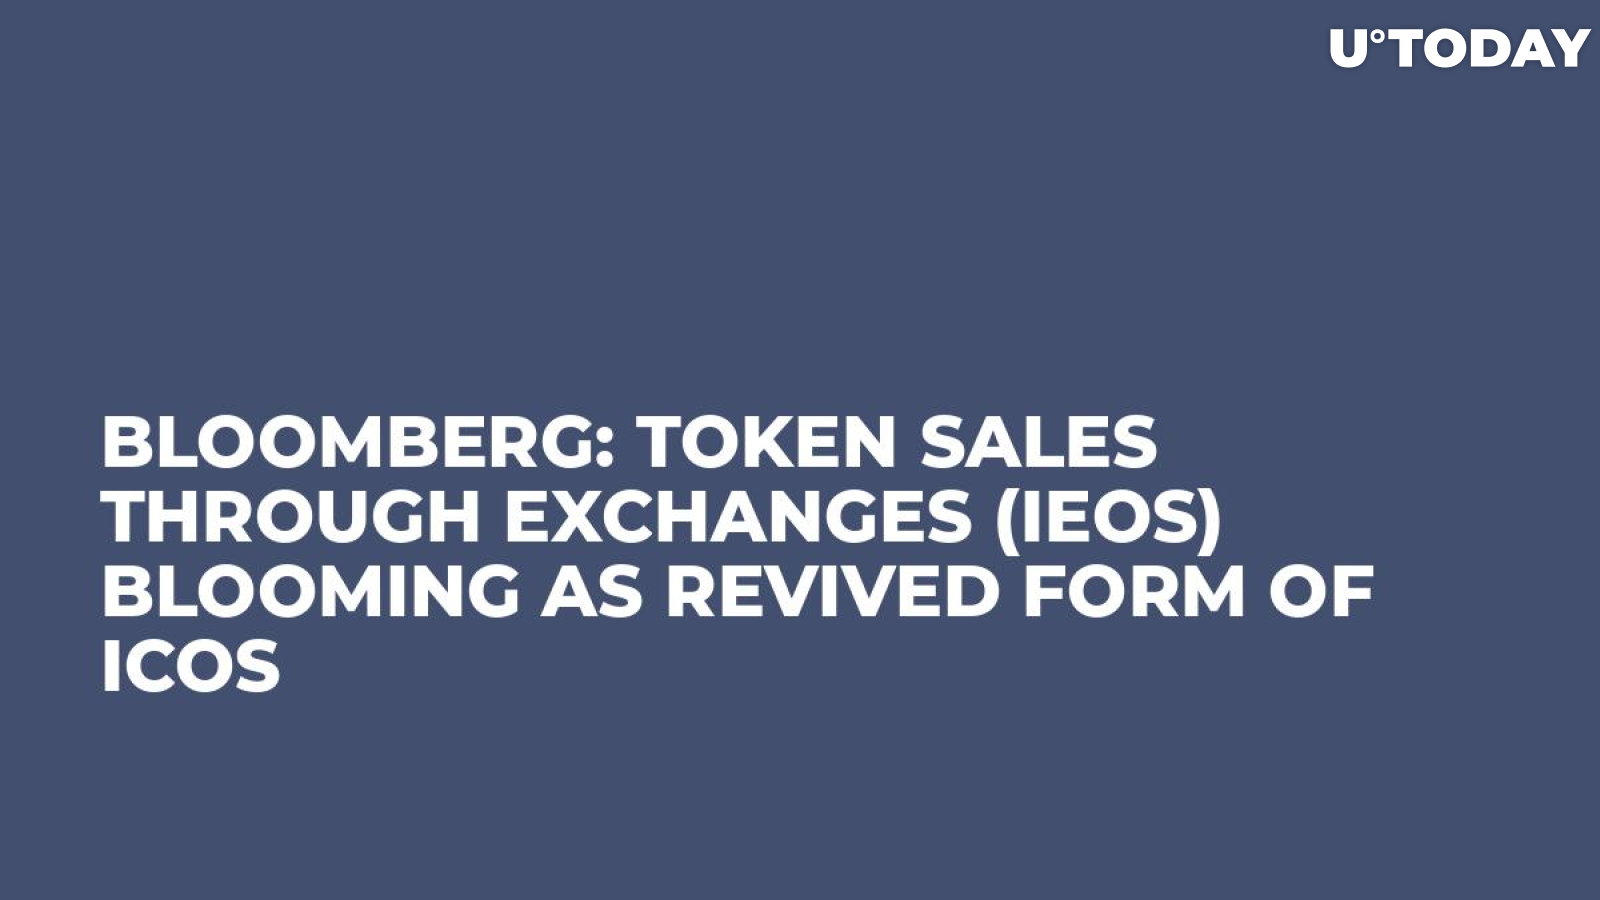 Bloomberg: Token Sales Through Exchanges (IEOs) Blooming as Revived Form of ICOs